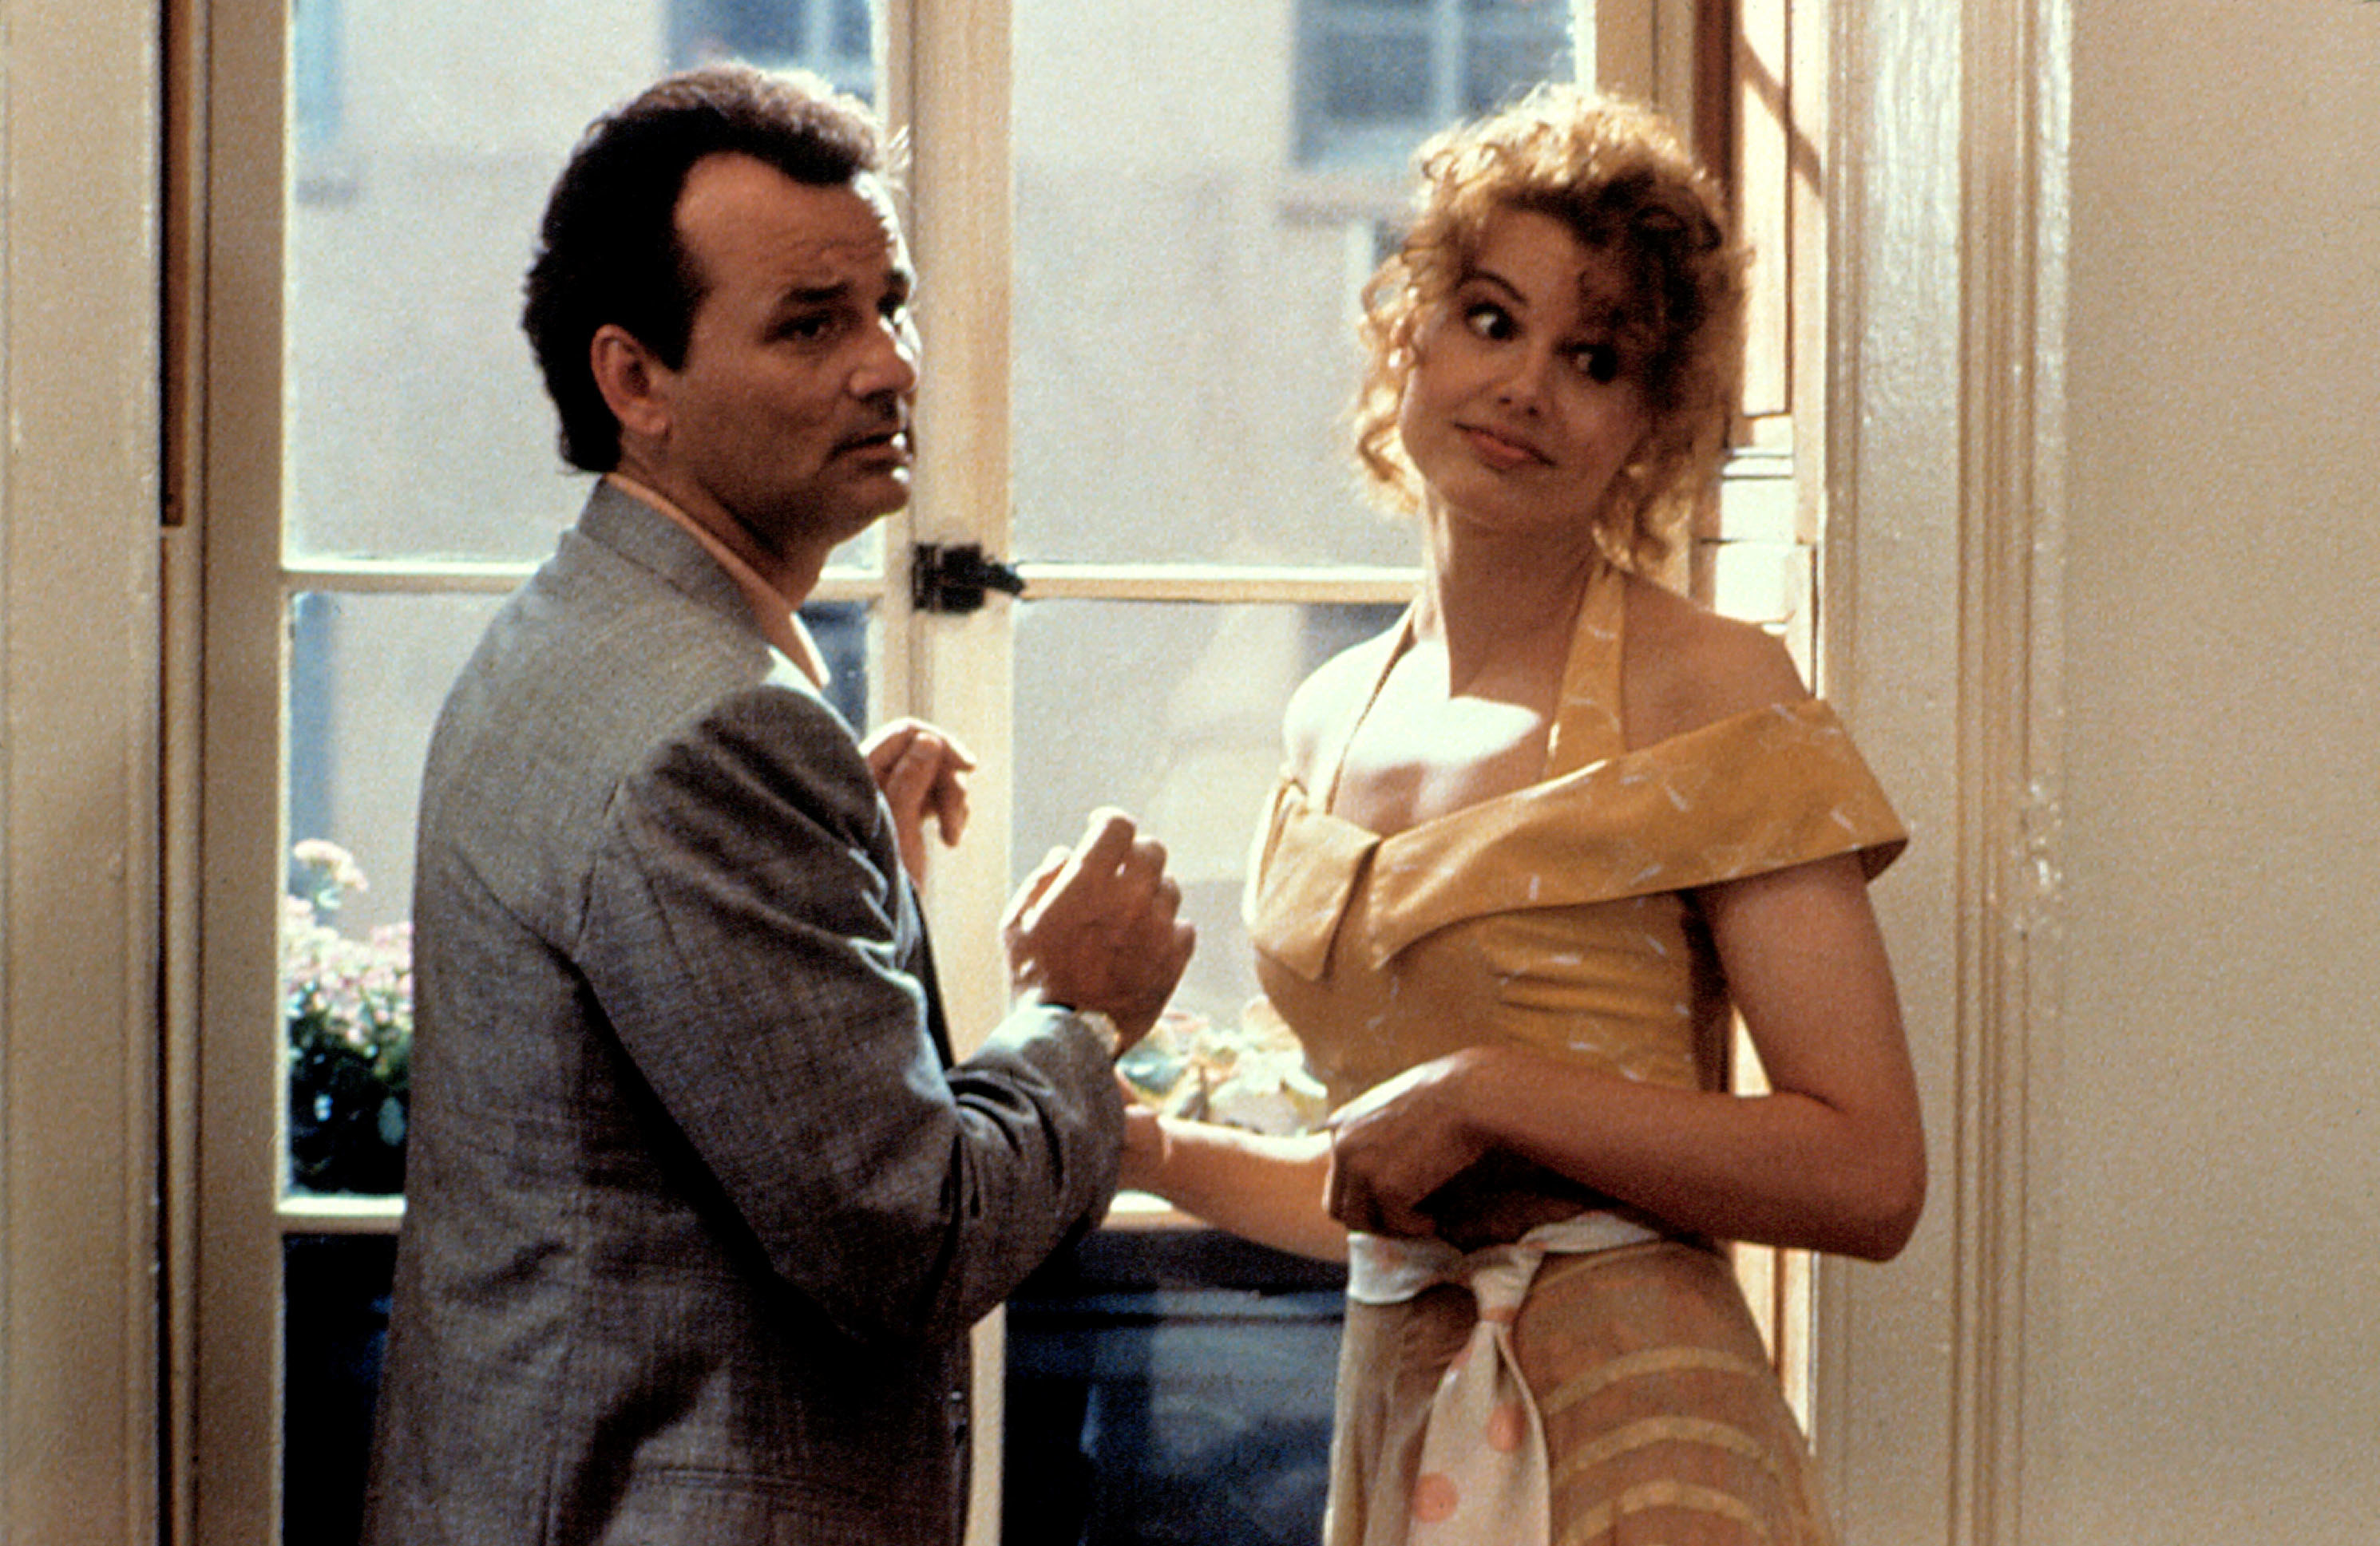 Geena and Bill stand by a window in the film